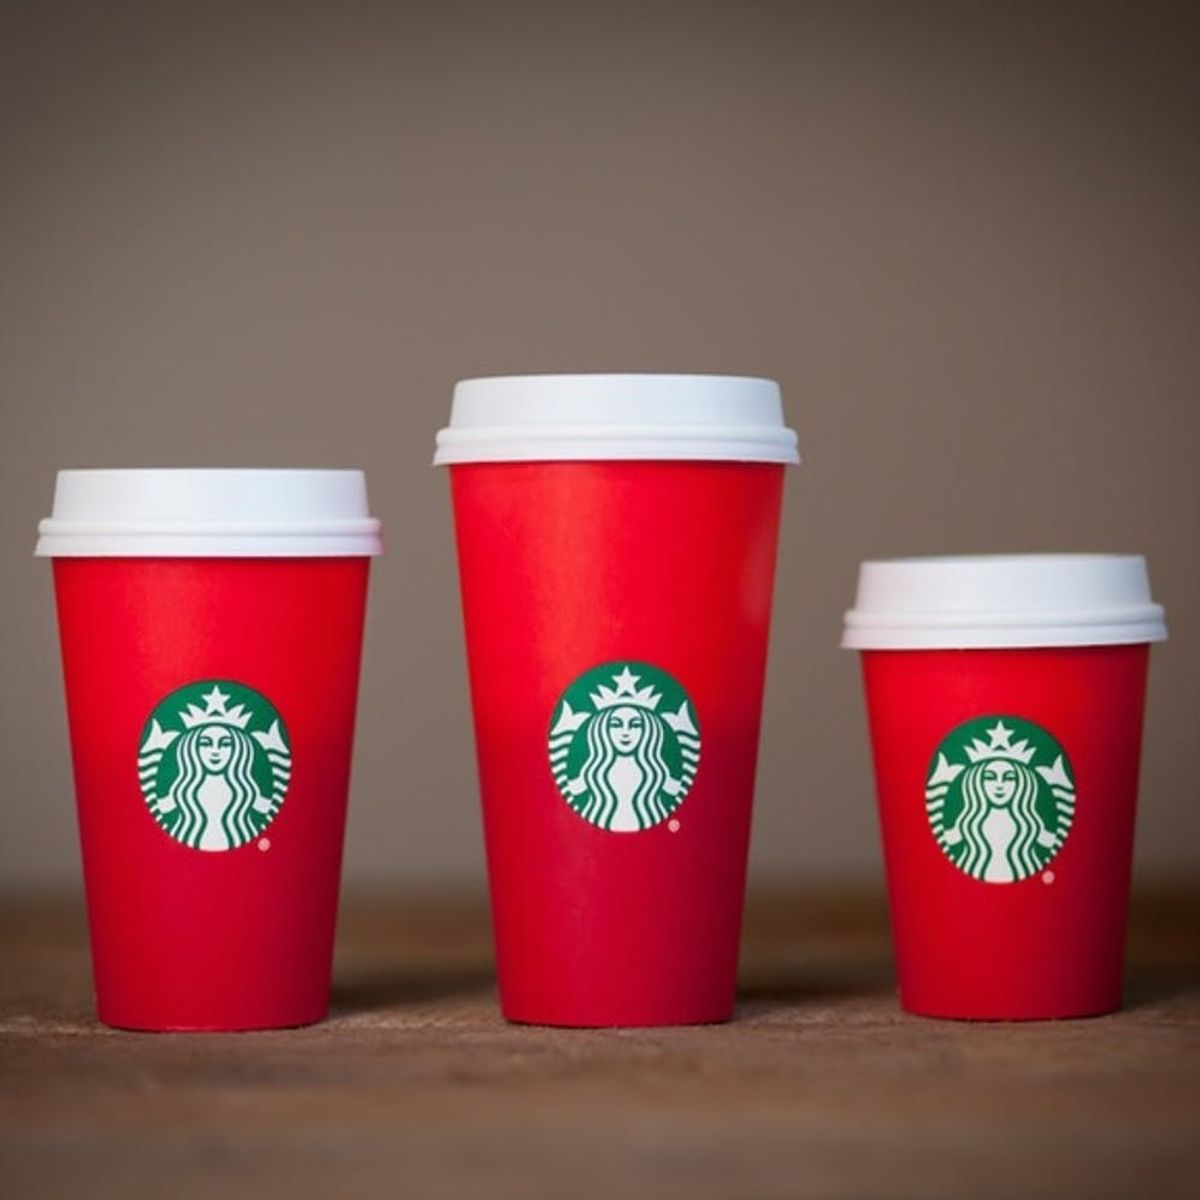 Starbucks 2016 Holiday Cup Design Has Been Leaked and It Looks Like MEAT!